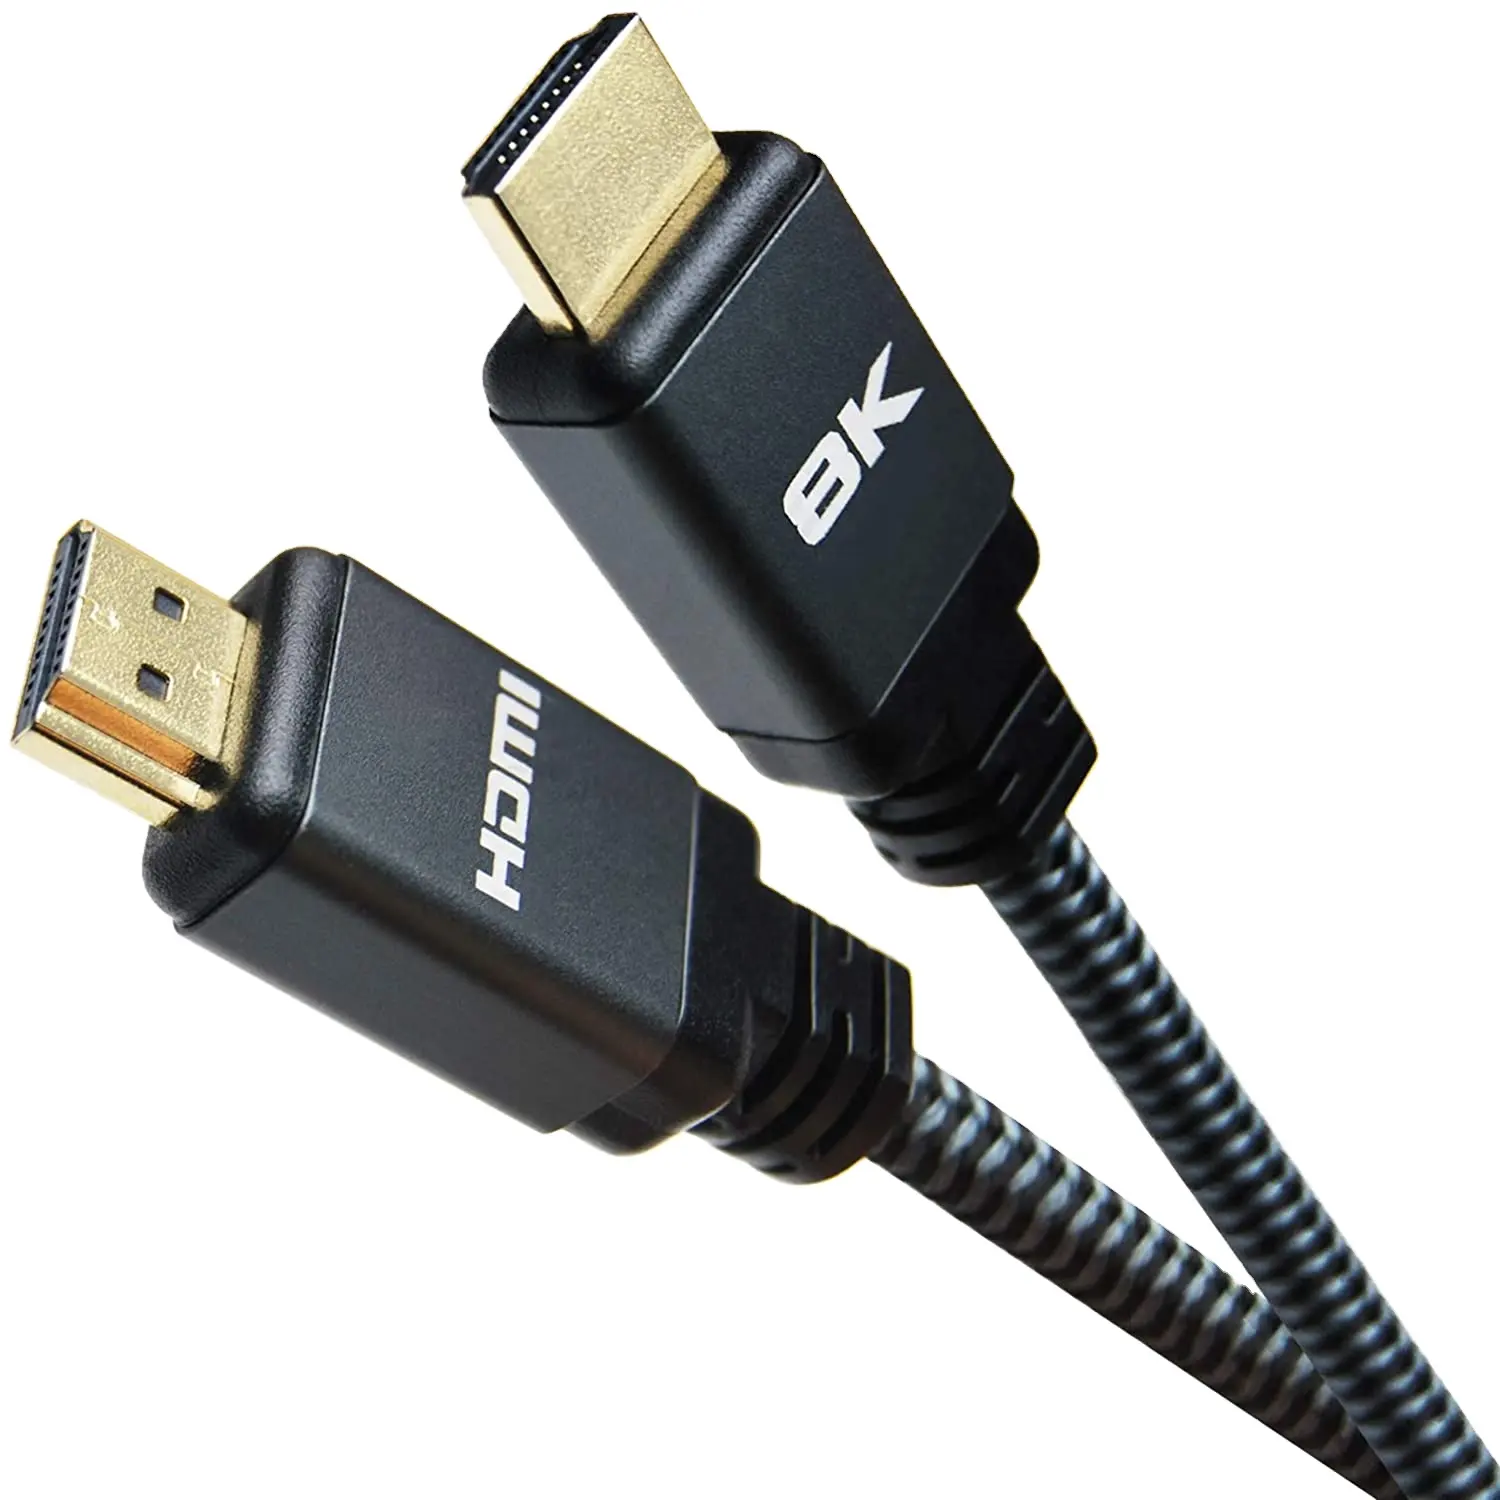 2022 RTFLY New Series 8K HDMI Cable high speed 48Gbps 4K@120Hz for PS4 TV Computer Laptop Monitor HDTV